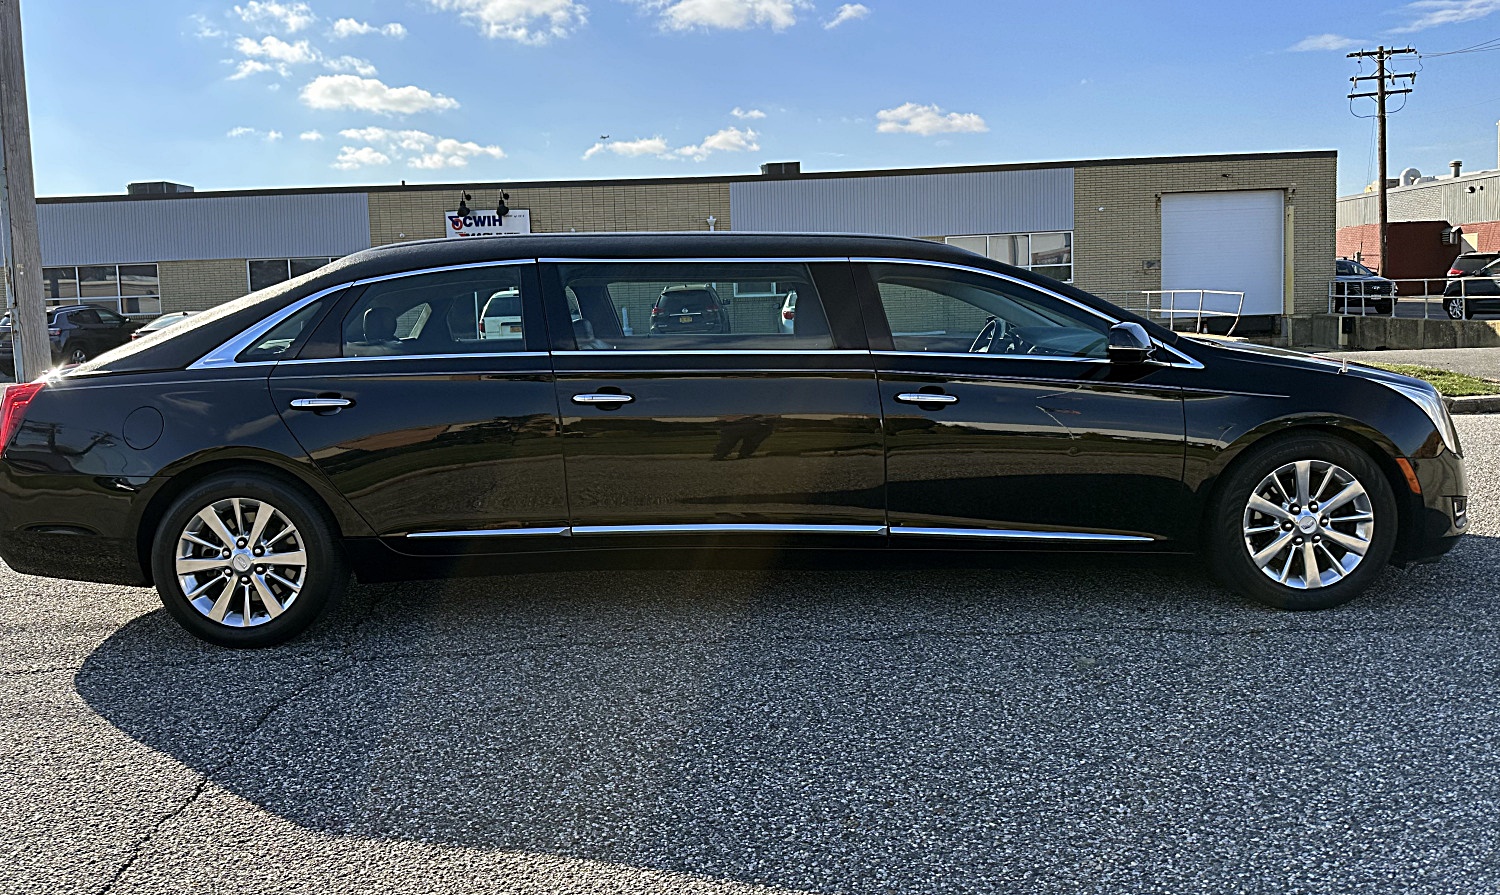 Top 10 Reasons why you should Hire Union Limousine for Steuben County Limo Service